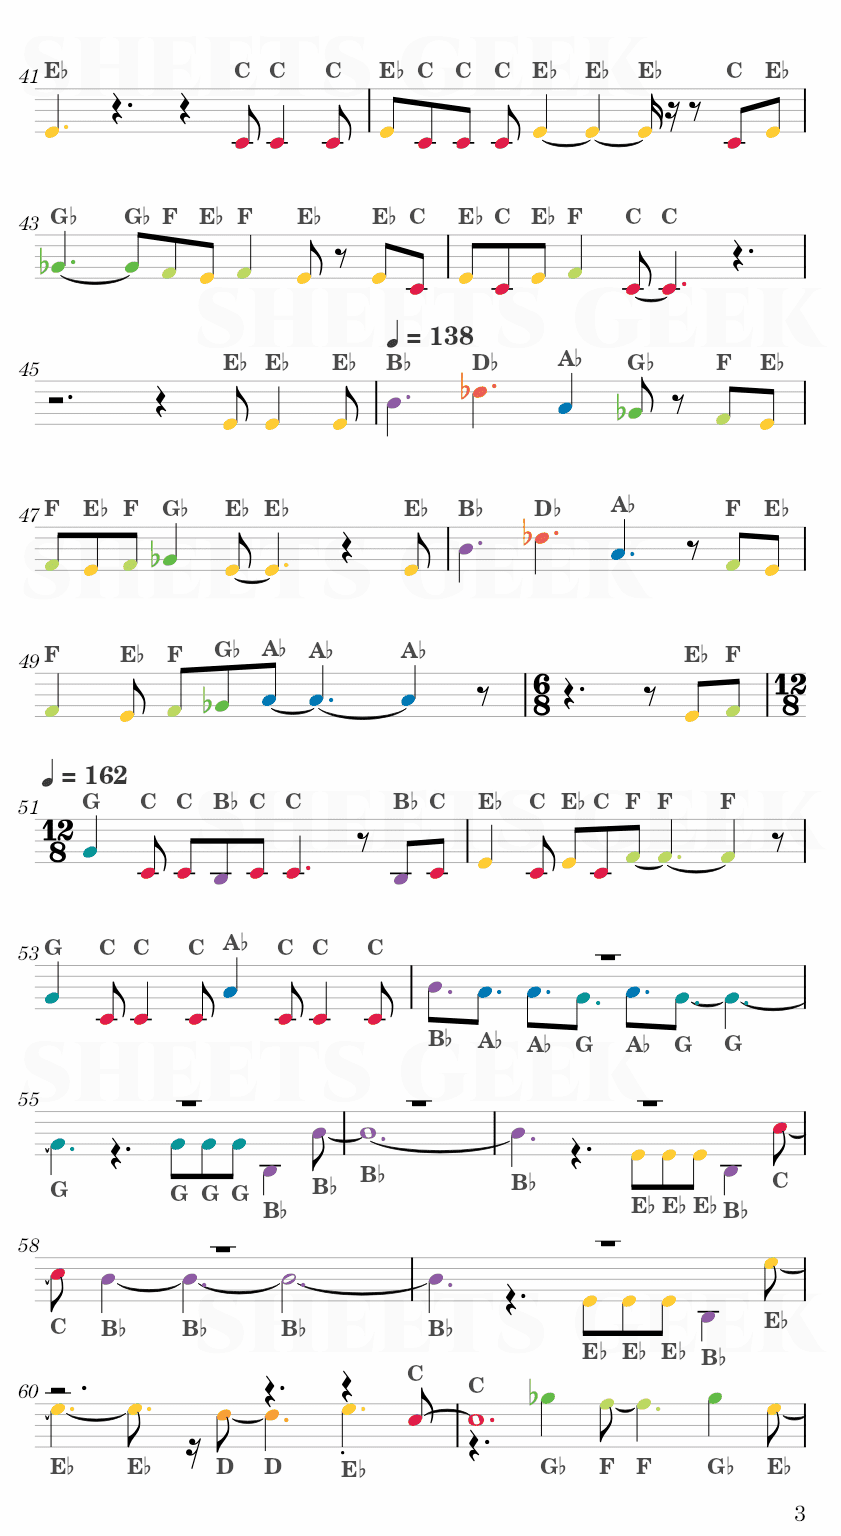 Into The Unknown - Idina Menzel and AURORA from Disney's Frozen 2 Easy Sheet Music Free for piano, keyboard, flute, violin, sax, cello page 3